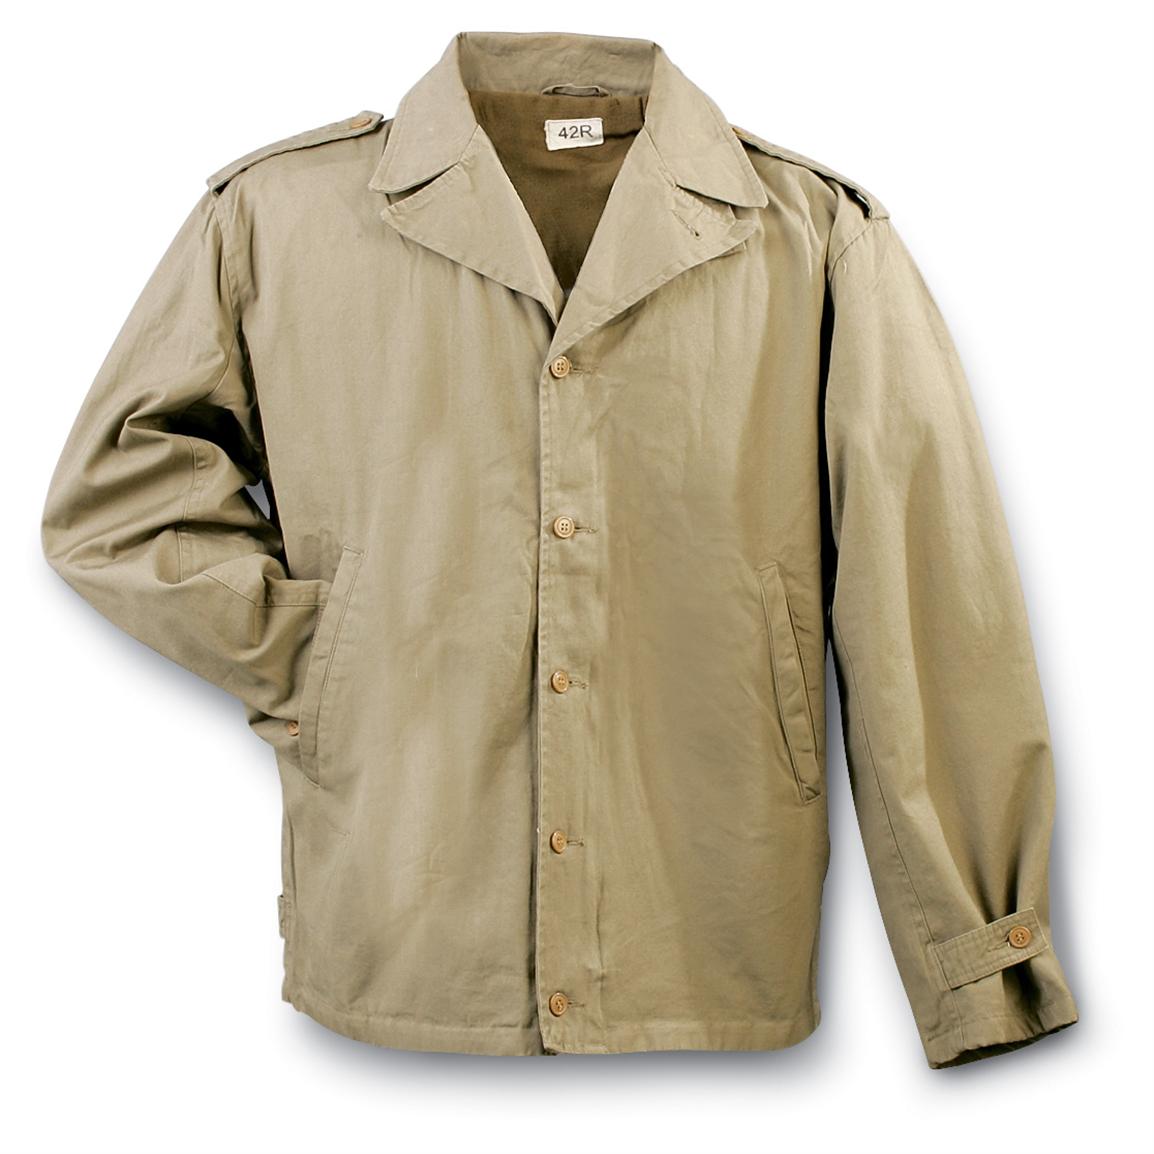 Reproduction Enlisted Man's U.S. M41 Jacket, O.D.